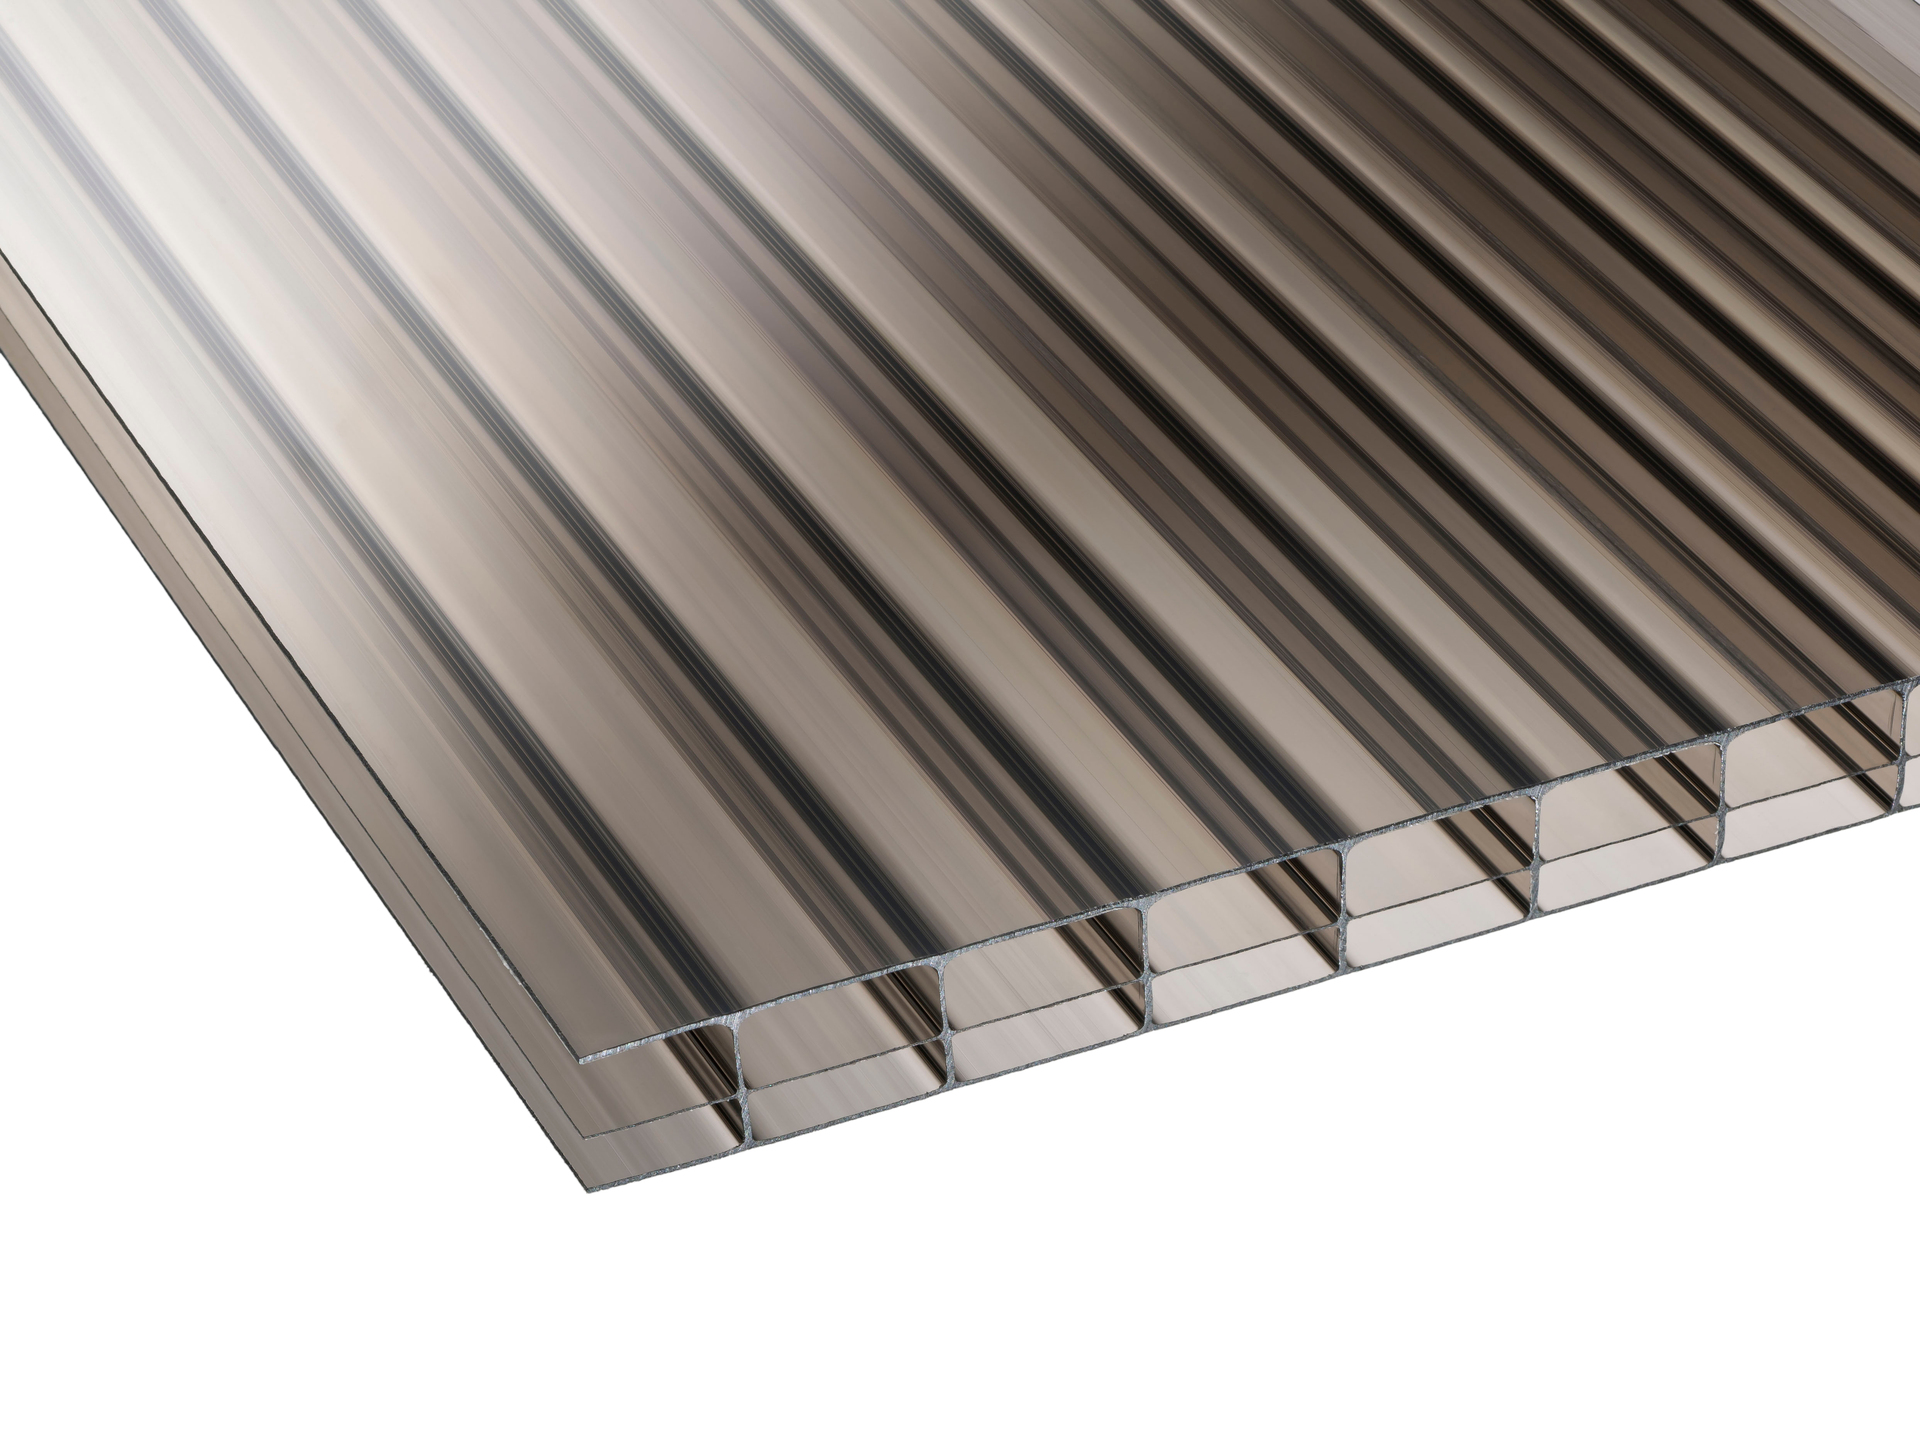 Image of 16mm Bronze Multiwall Polycarbonate Sheet - 2500 x 900mm